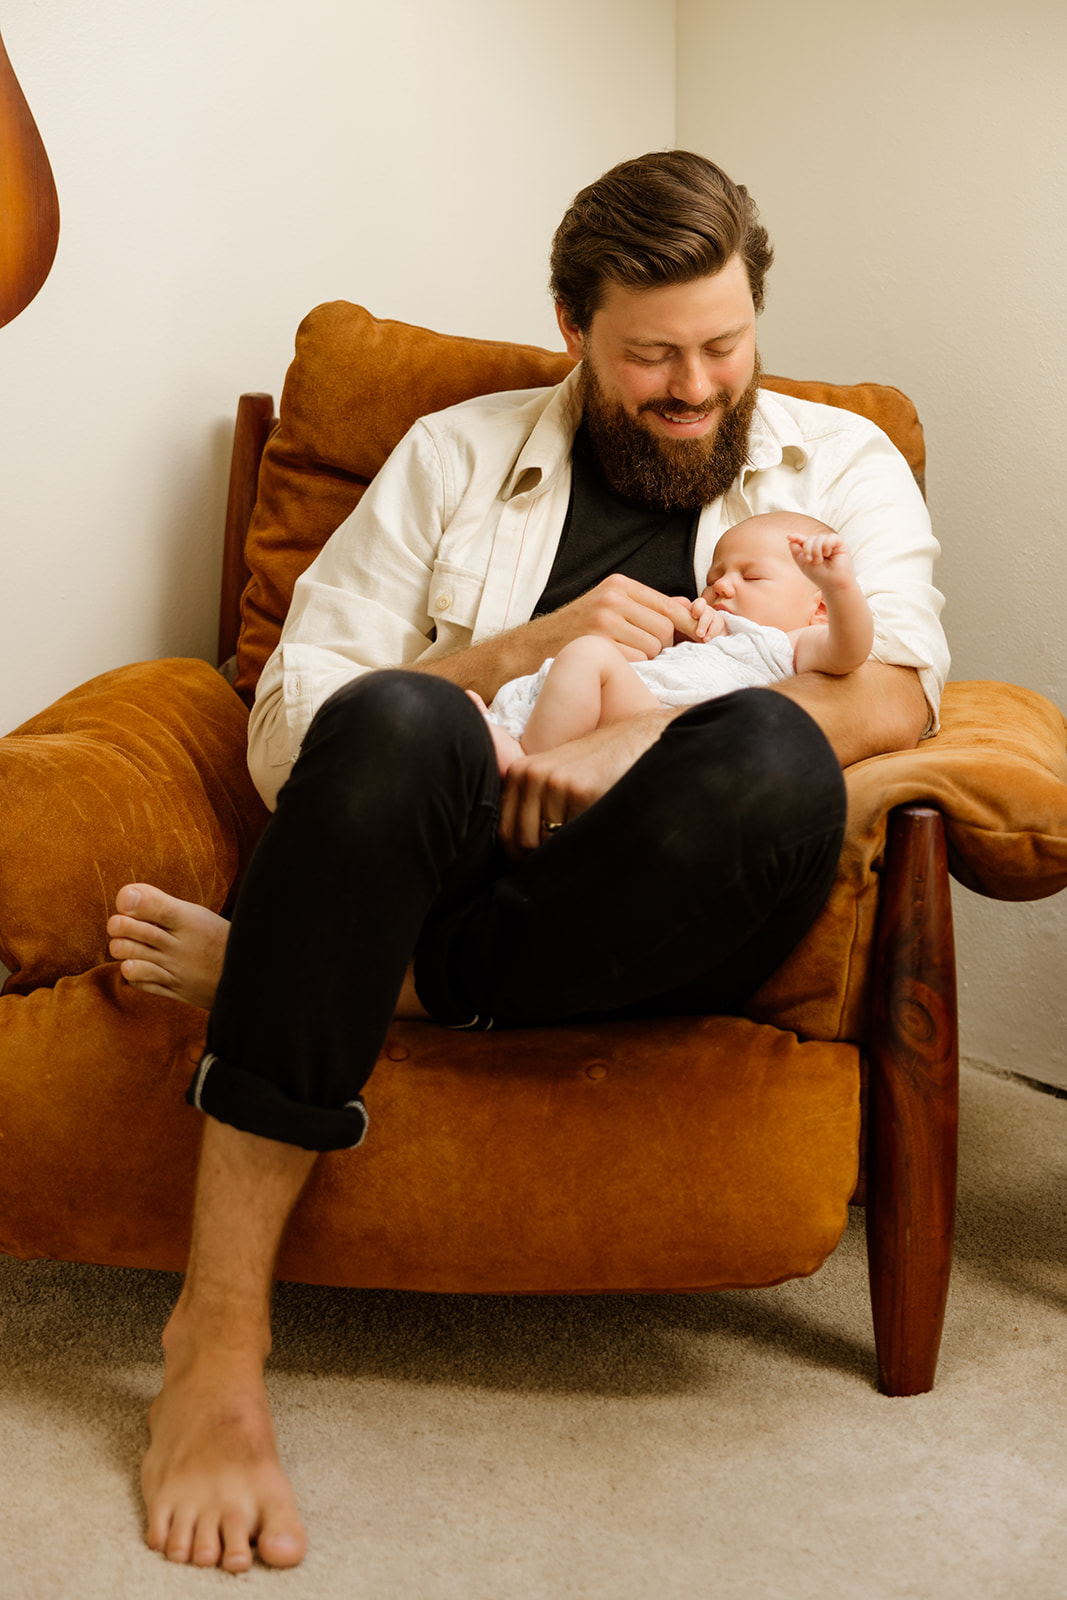 Intimate photo of a father holding his newborn baby while sitting in a comfy chair.